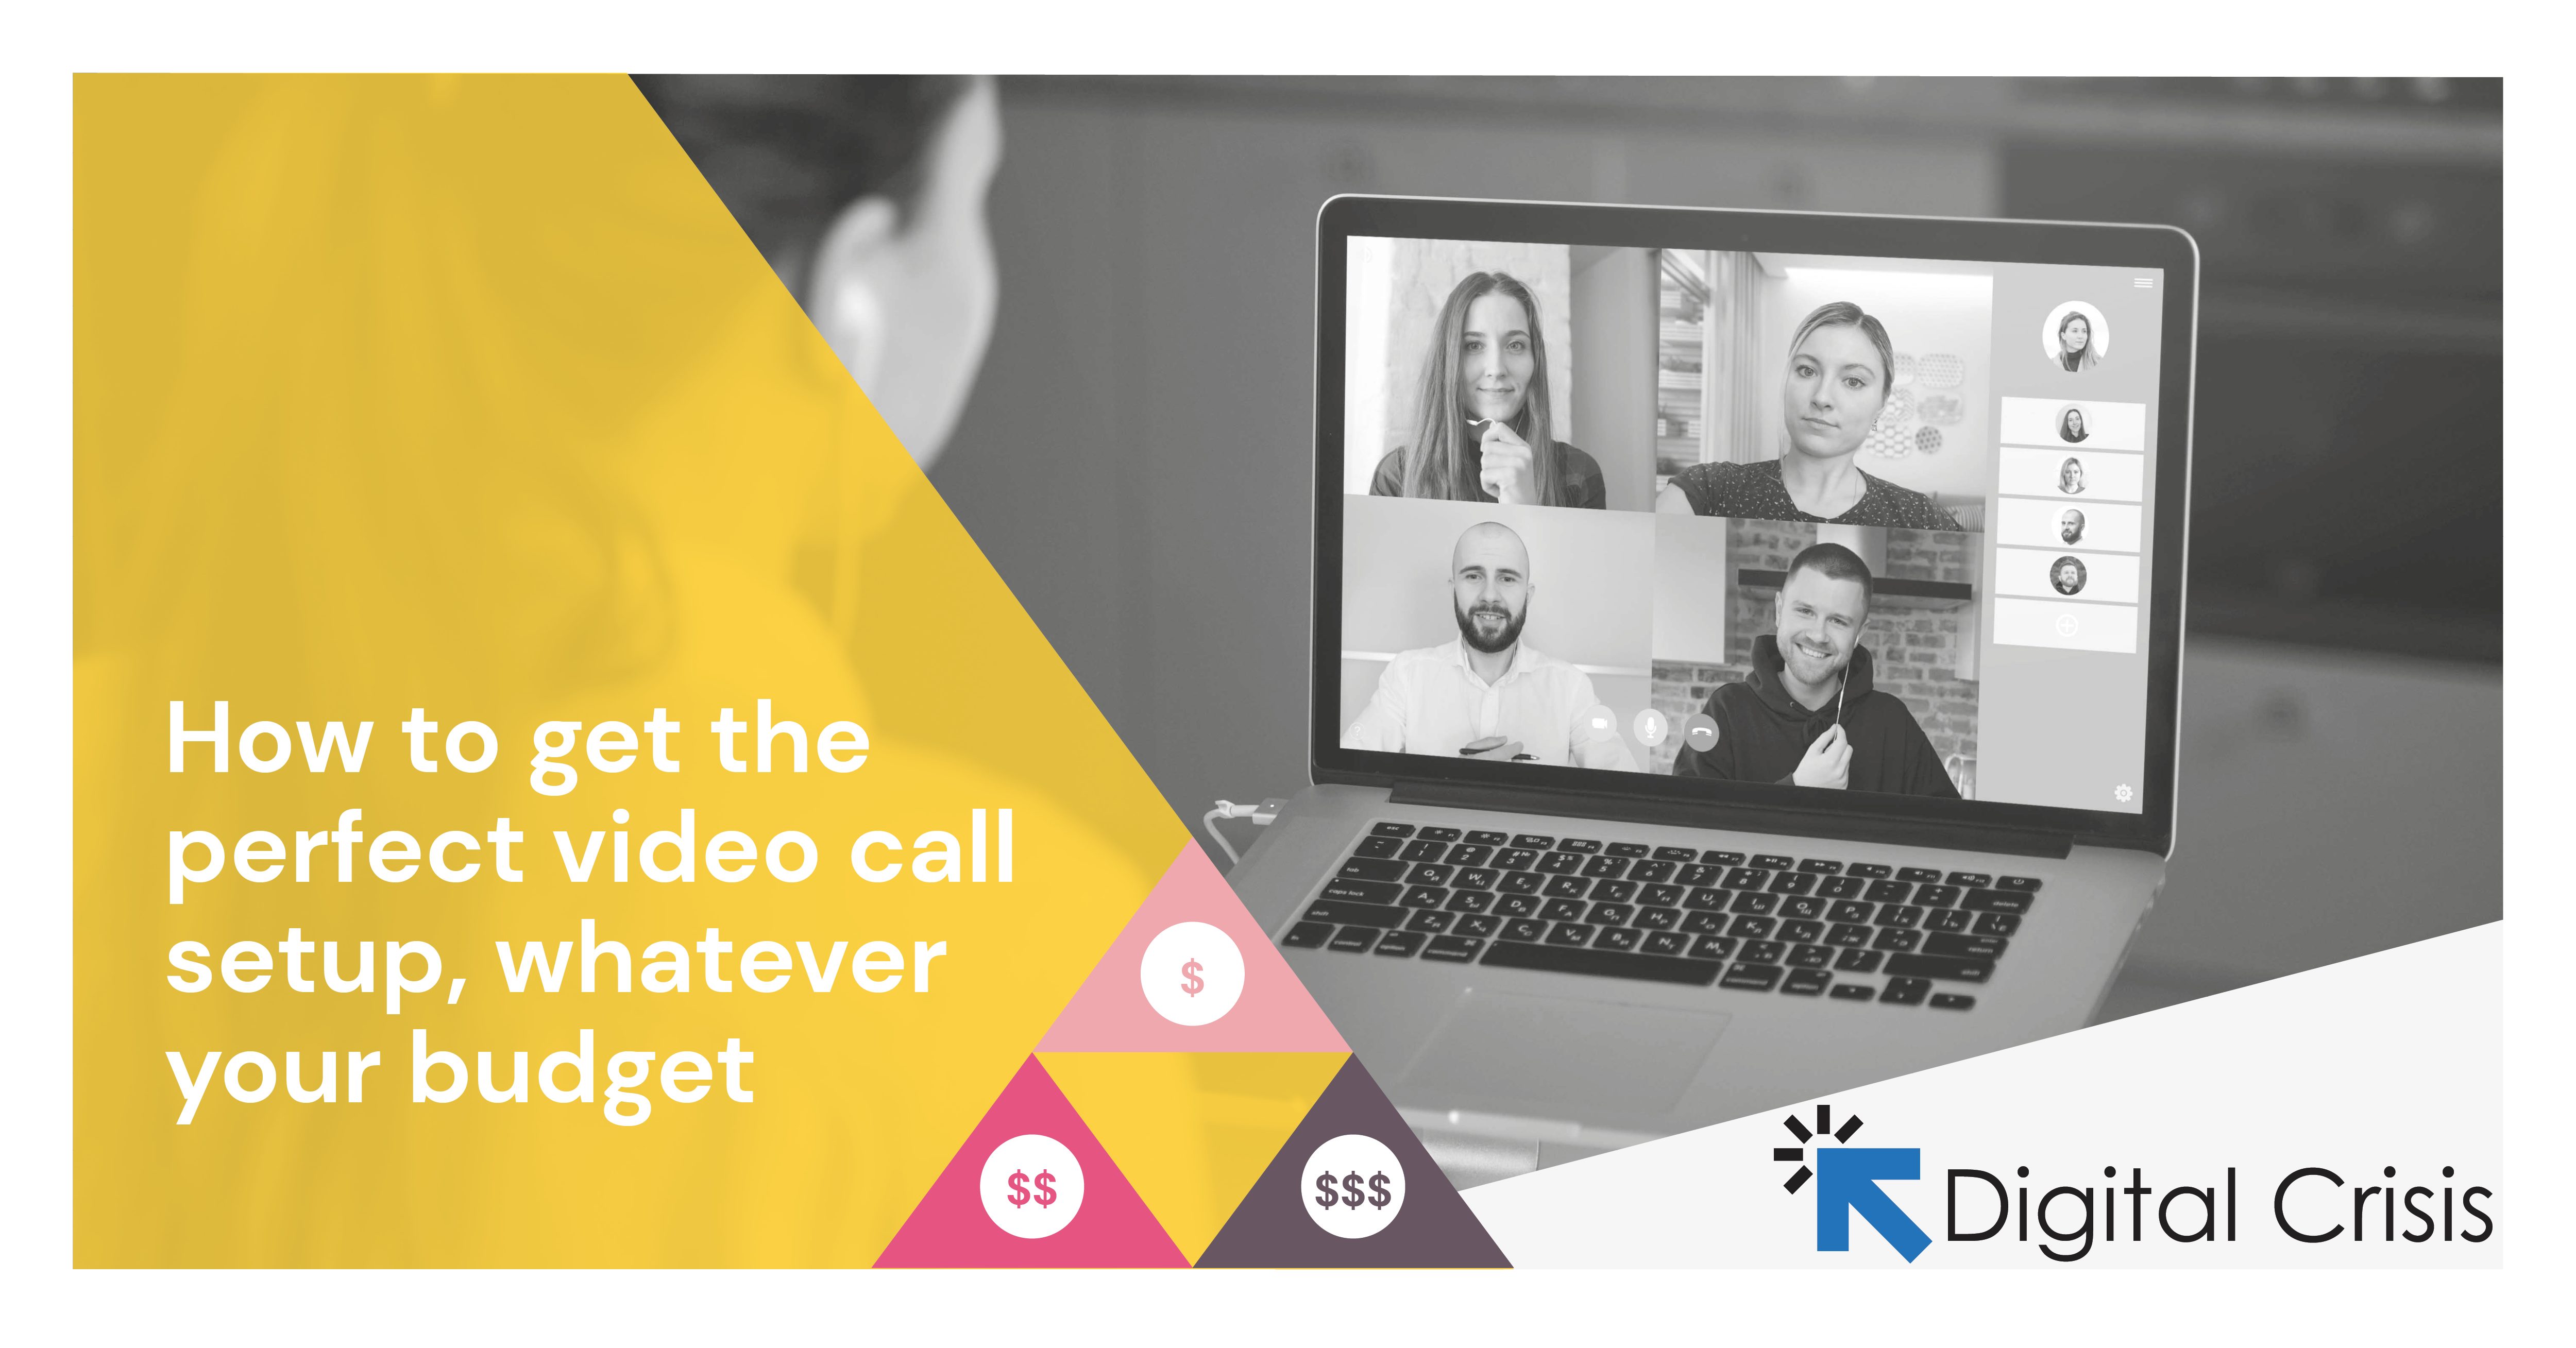 Video Calls are here to stay. This guide will show you how to stream like a pro!